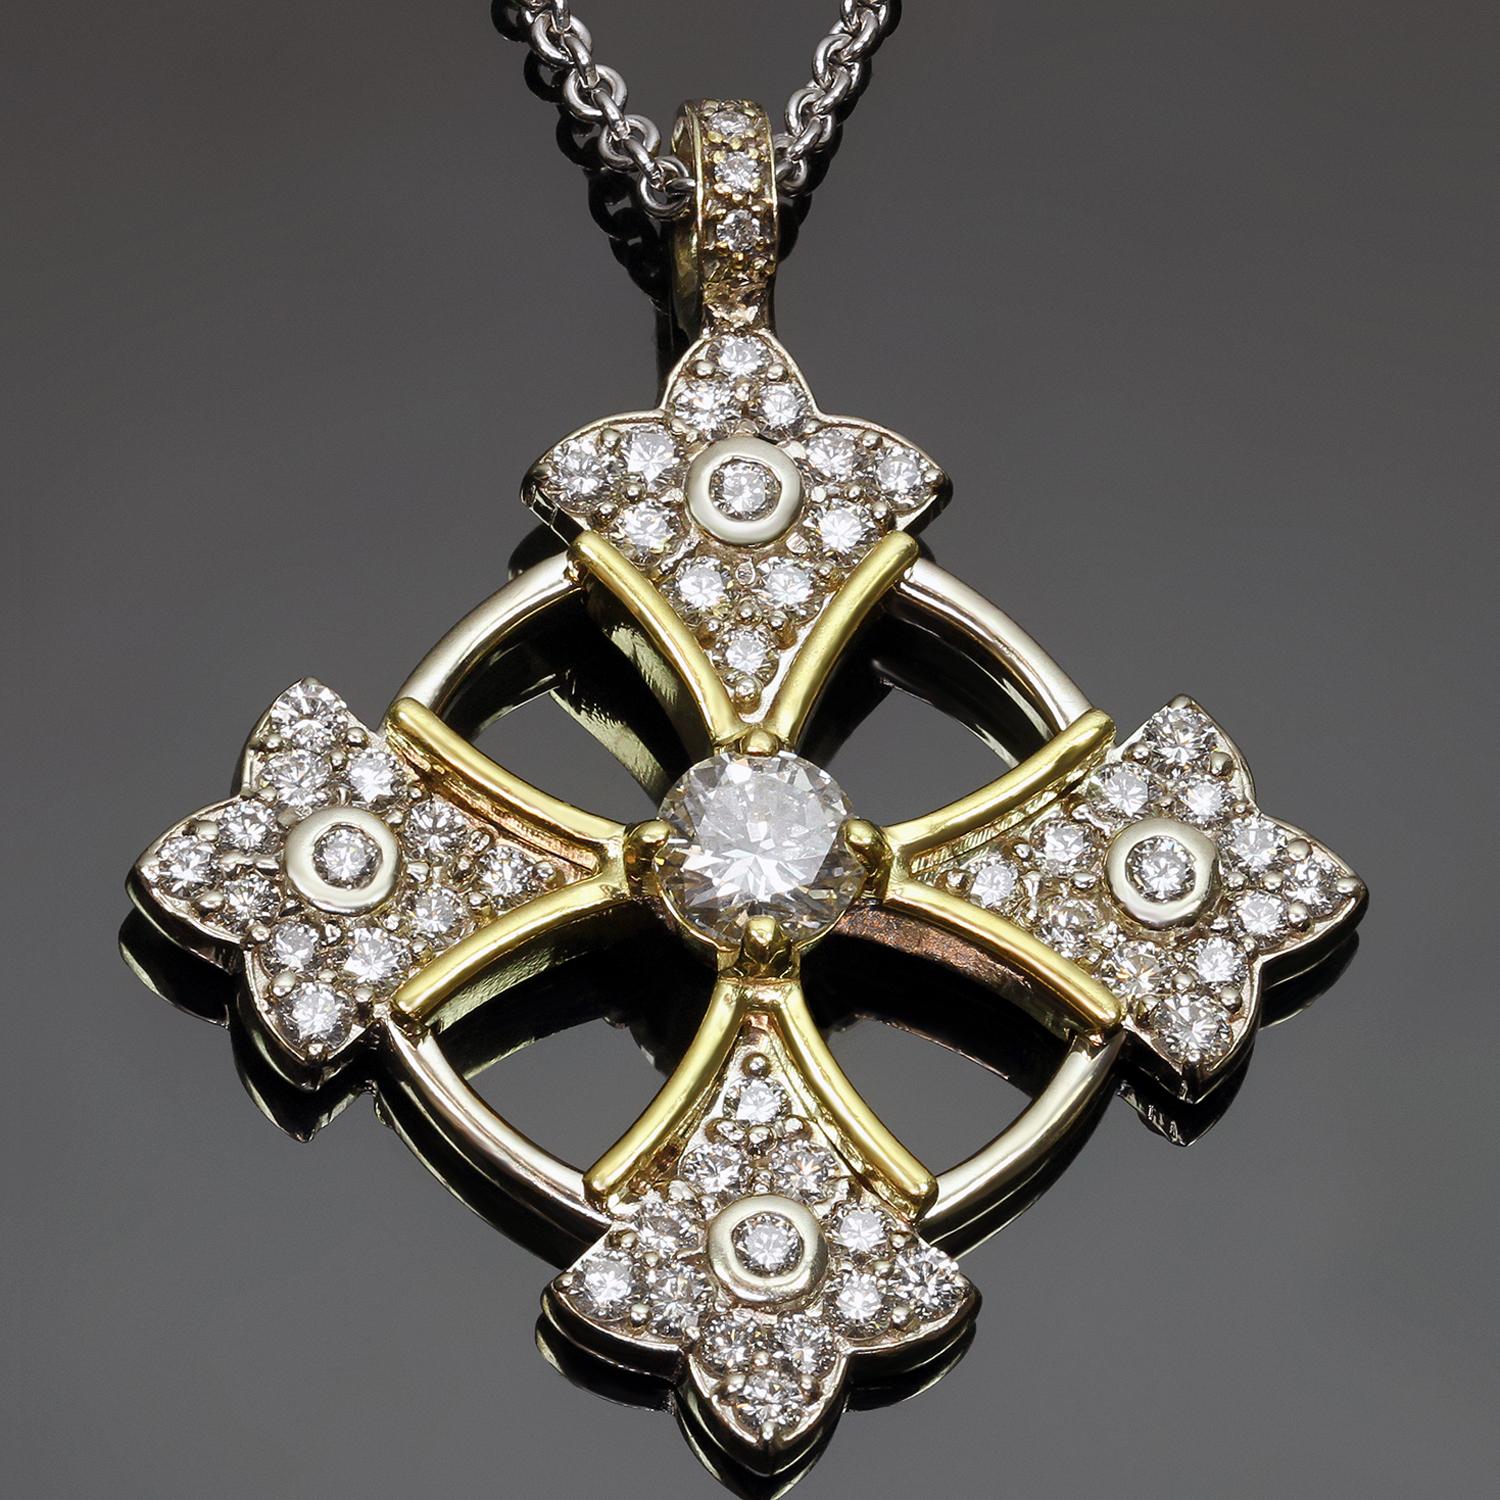 This gorgeous modern Balestra necklace features a Patonce Cross Pendant crafted in 14k white & yellow gold and set with an estimated 0.88 carat diamond in the center F-G color, SI-I clarity, surrounded with an estimated 1.70 carats of diamonds in